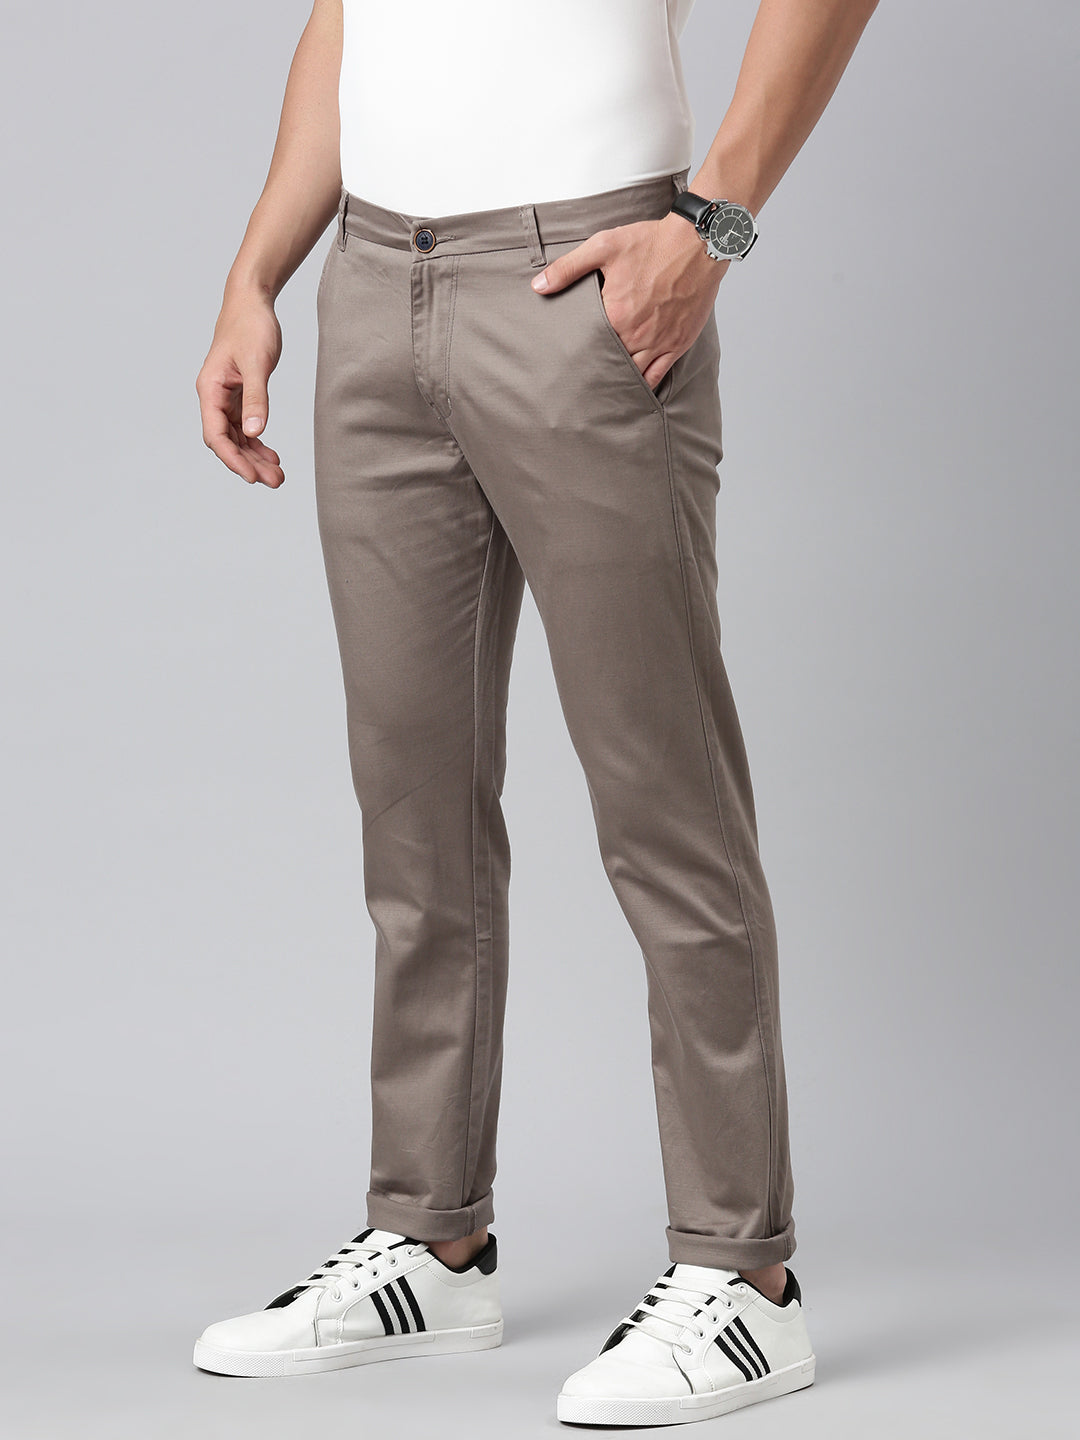 Classic Men's Trousers for Effortless Style - Taupe